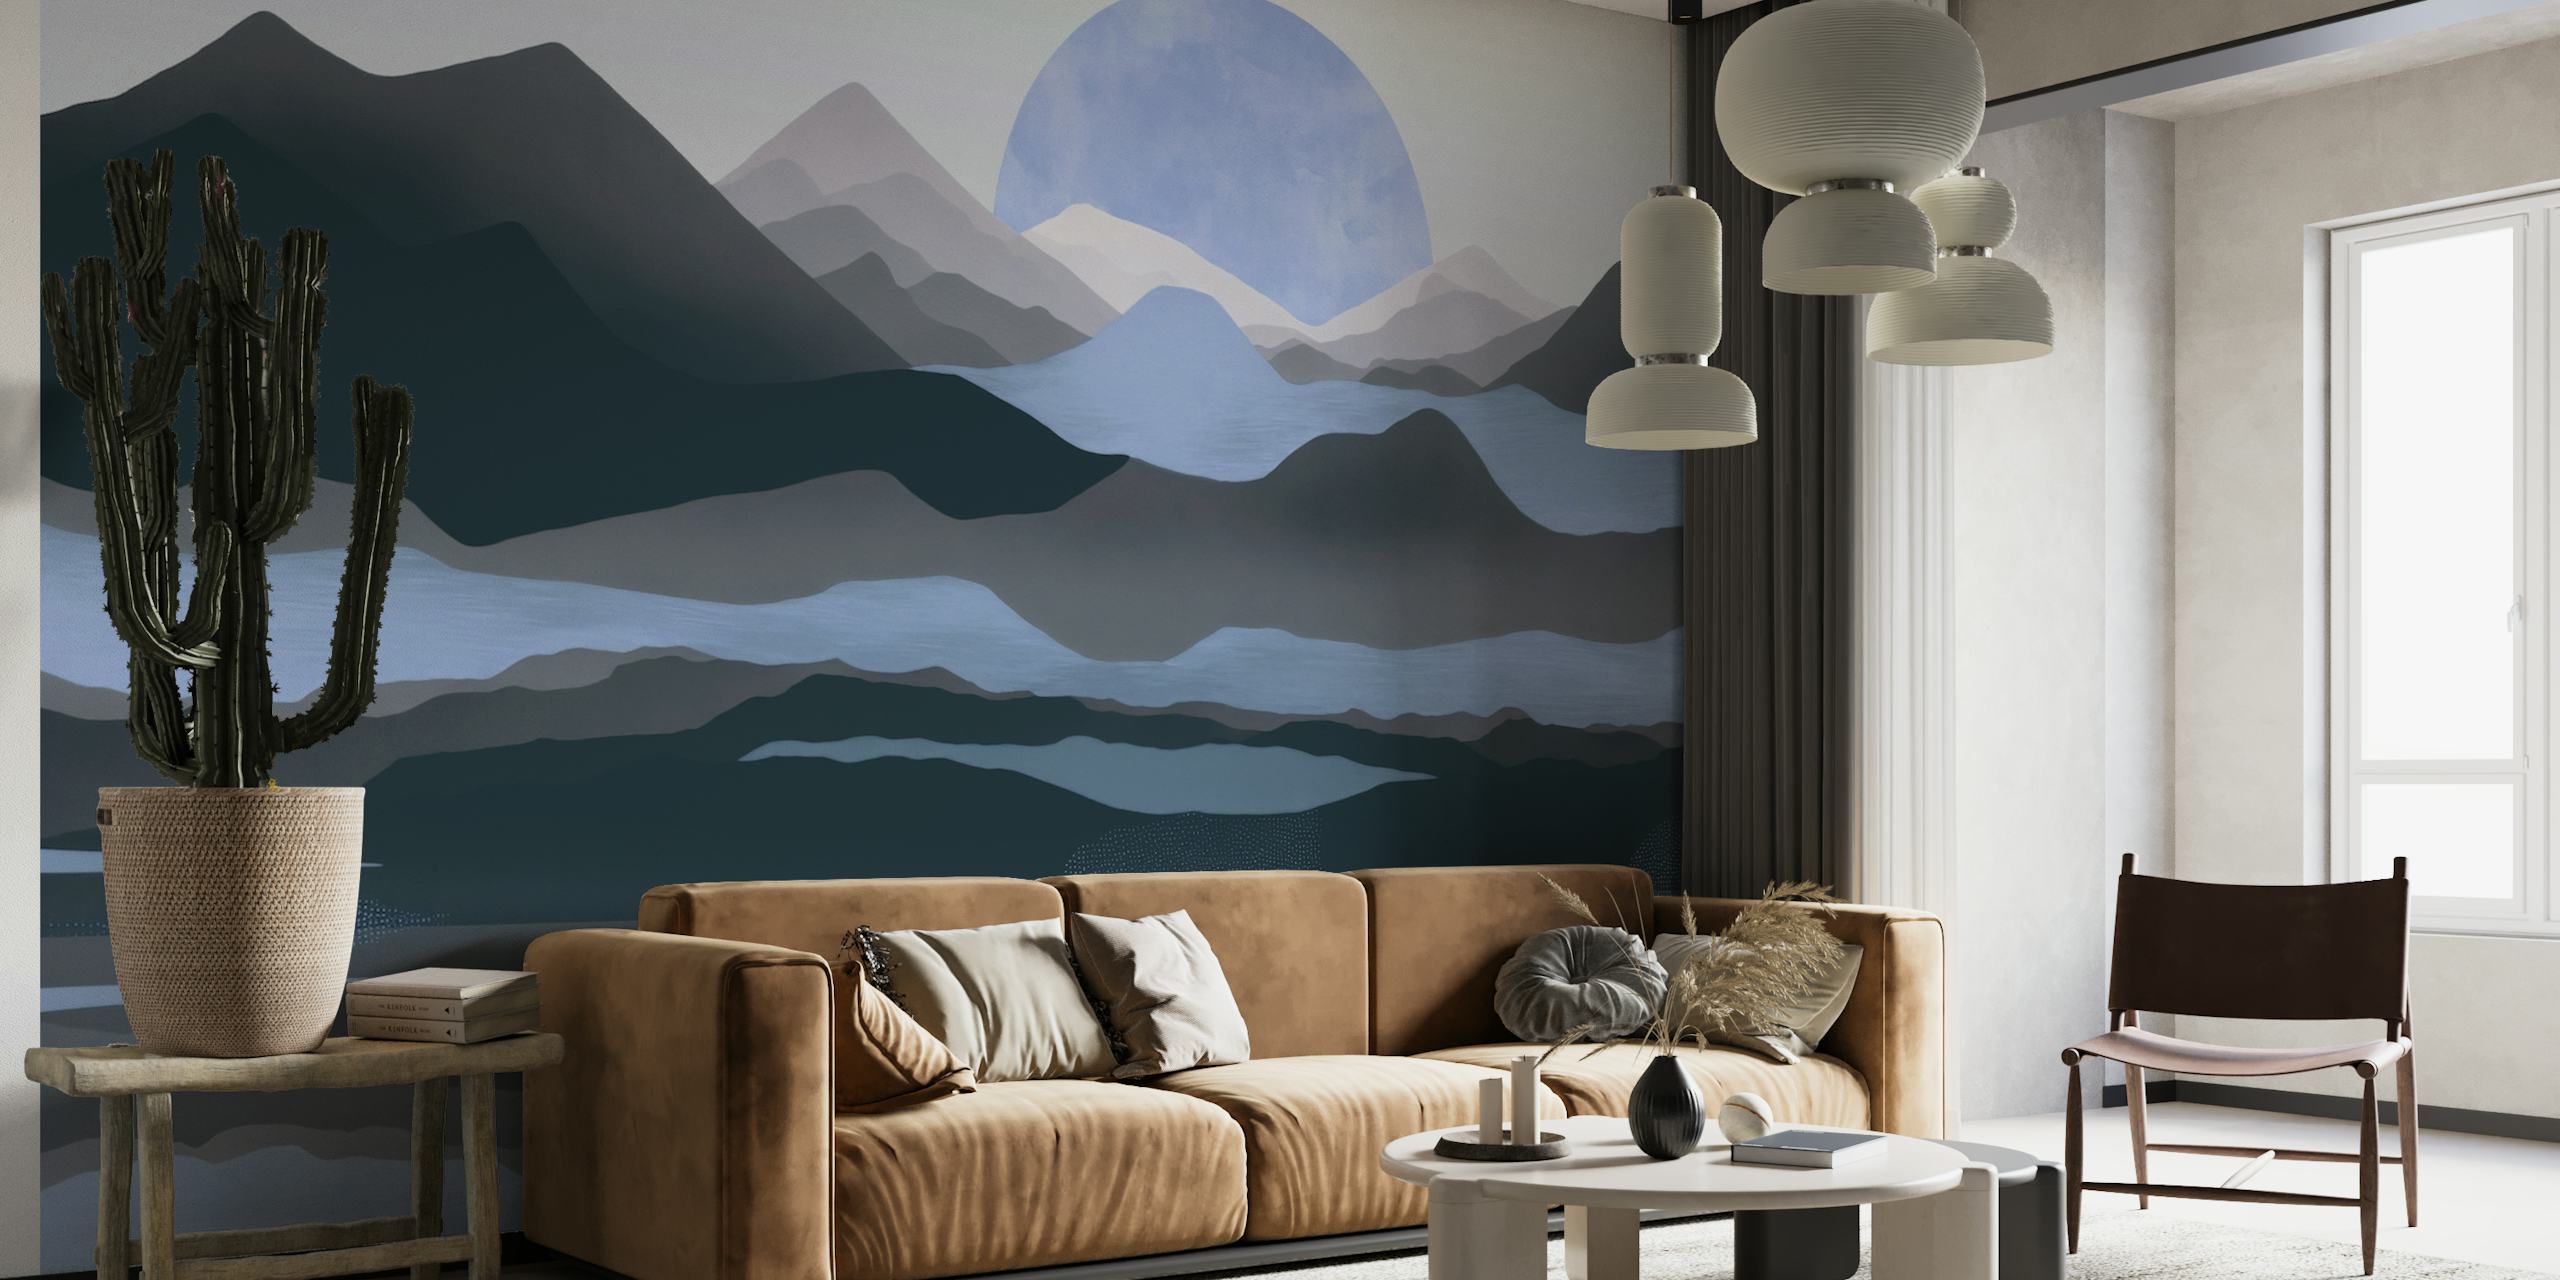 Calm Moon Rise over Mountain Range wall mural for tranquil interior decor